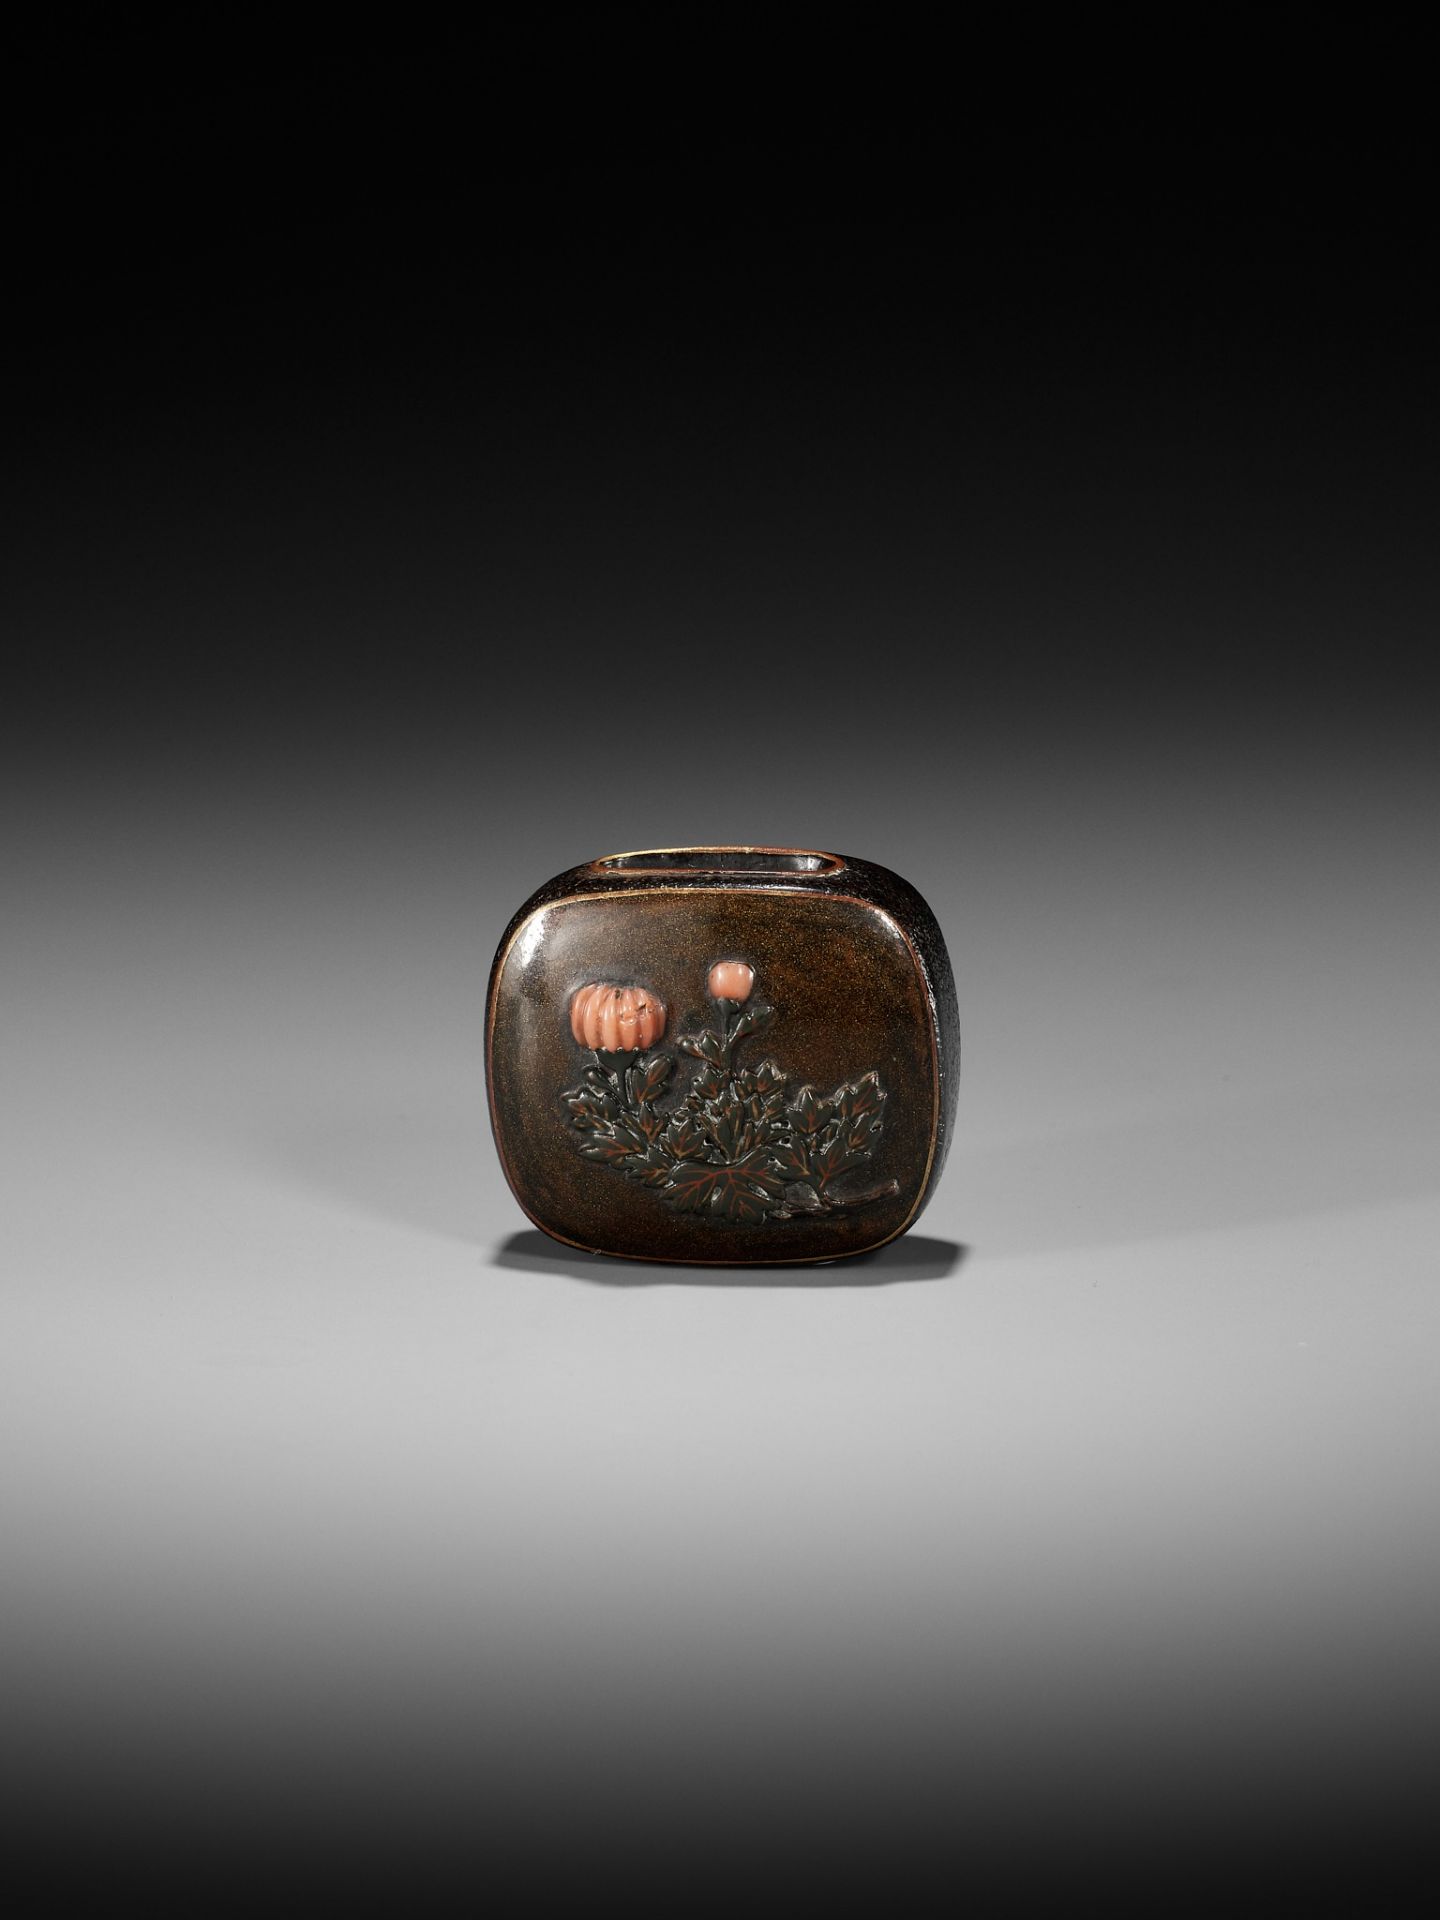 A RARE AND UNUSUAL LACQUER NETSUKE WITH FLORAL DESIGN - Image 2 of 10